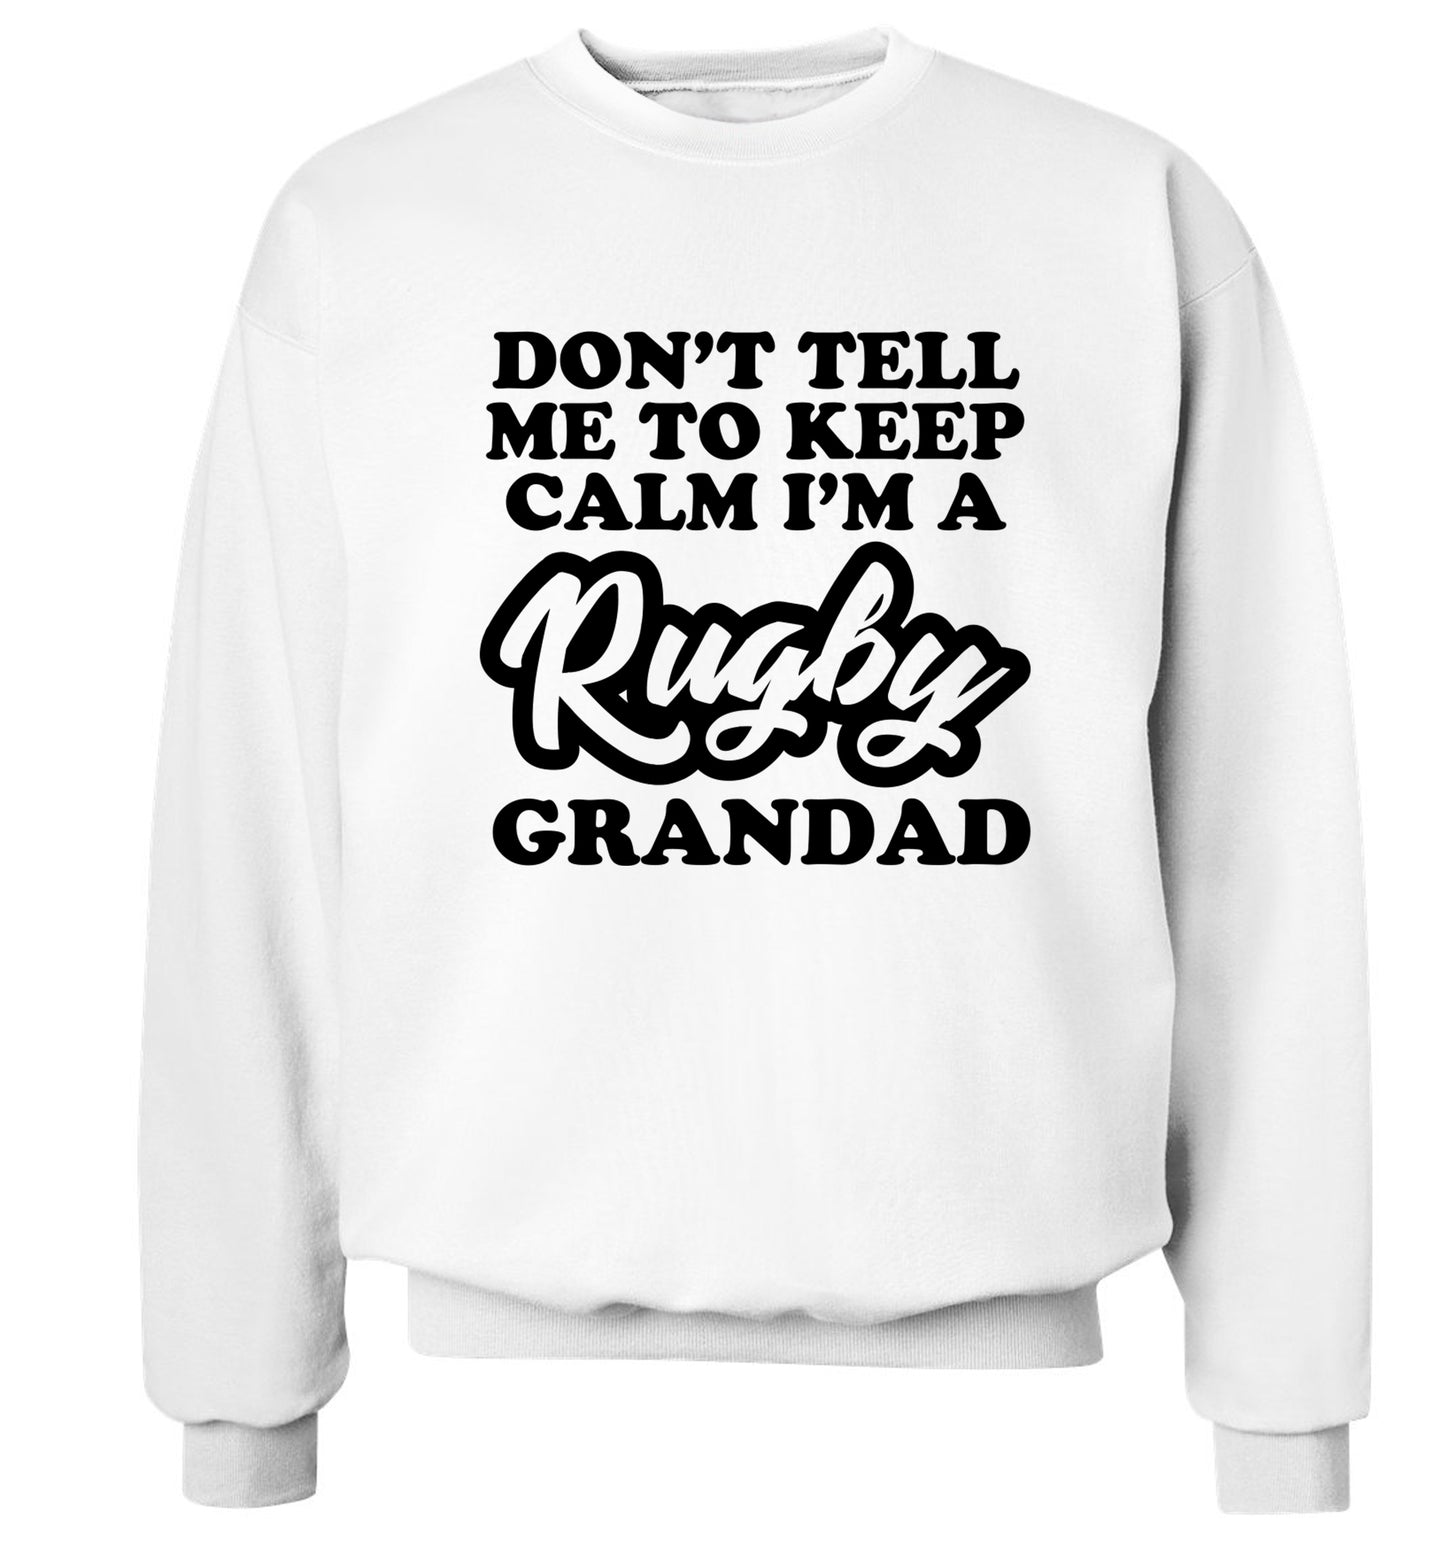 Don't tell me to keep calm I'm a rugby dad Adult's unisex white Sweater 2XL